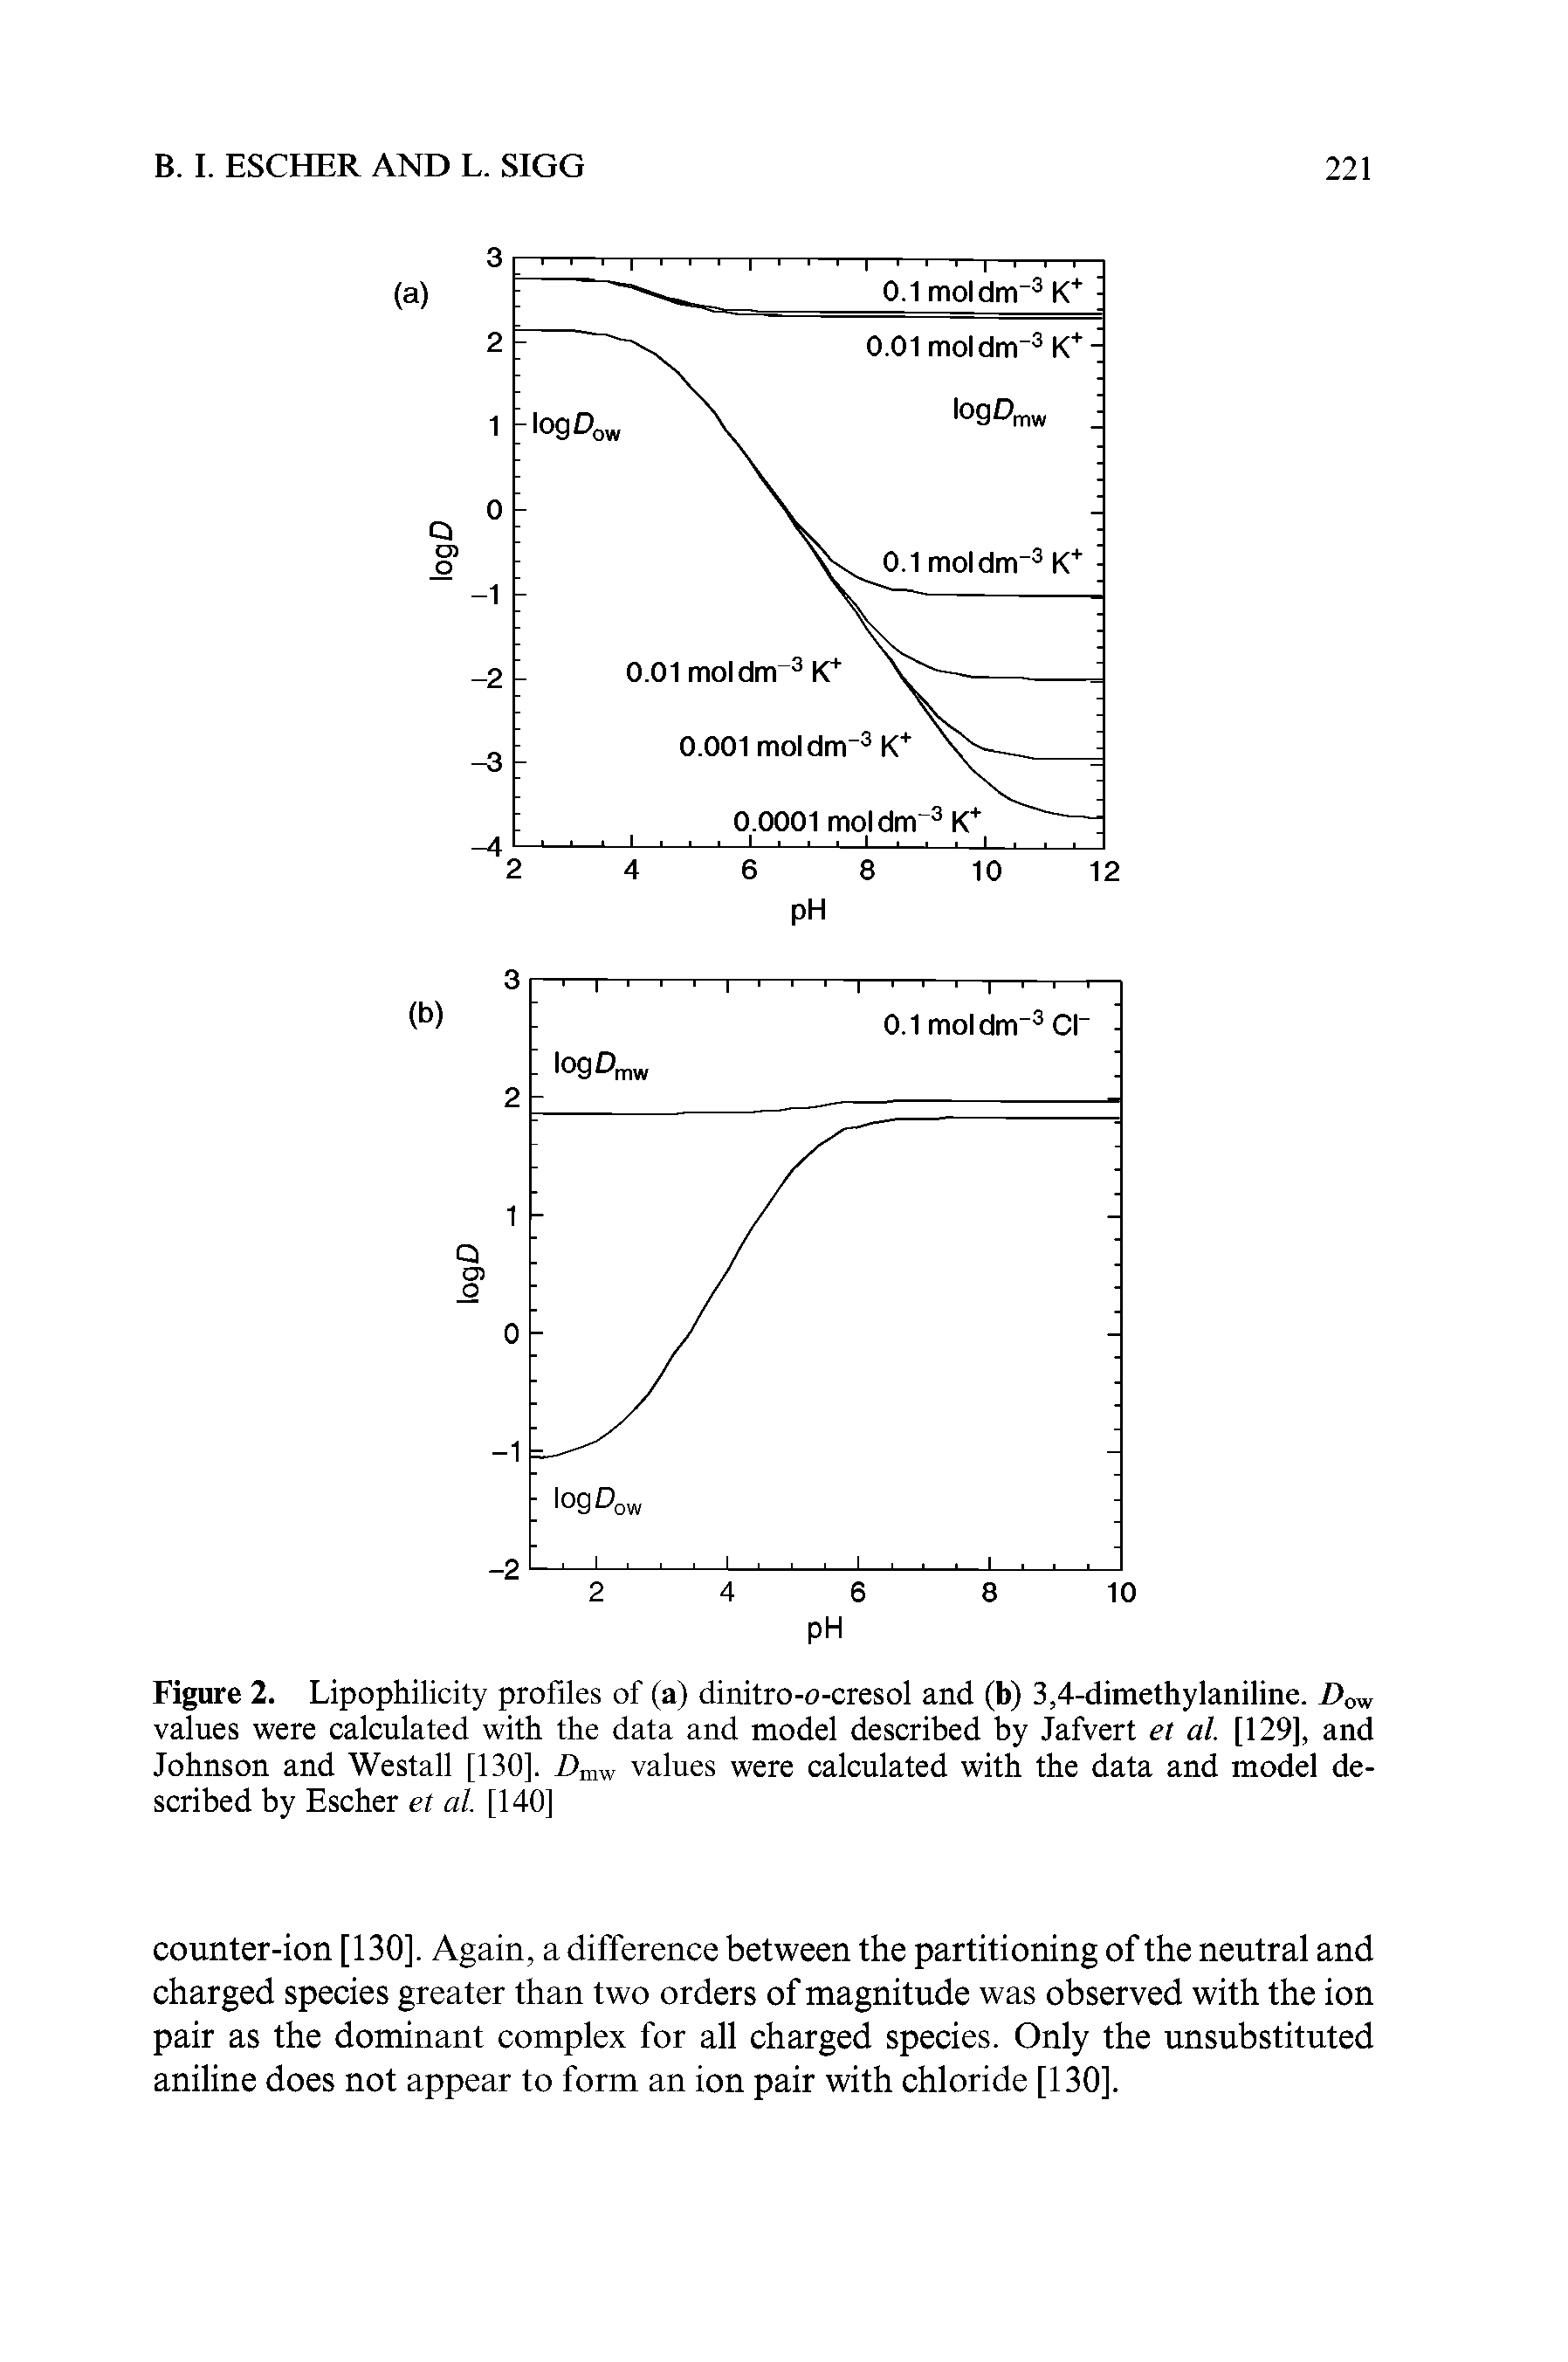 Figure 2. Lipophilicity profiles of (a) dinitro-o-cresol and (b) 3,4-dimethylaniline. Dow values were calculated with the data and model described by Jafvert et al. [129], and Johnson and Westall [130], Dmw values were calculated with the data and model described by Escher et al. [140]...